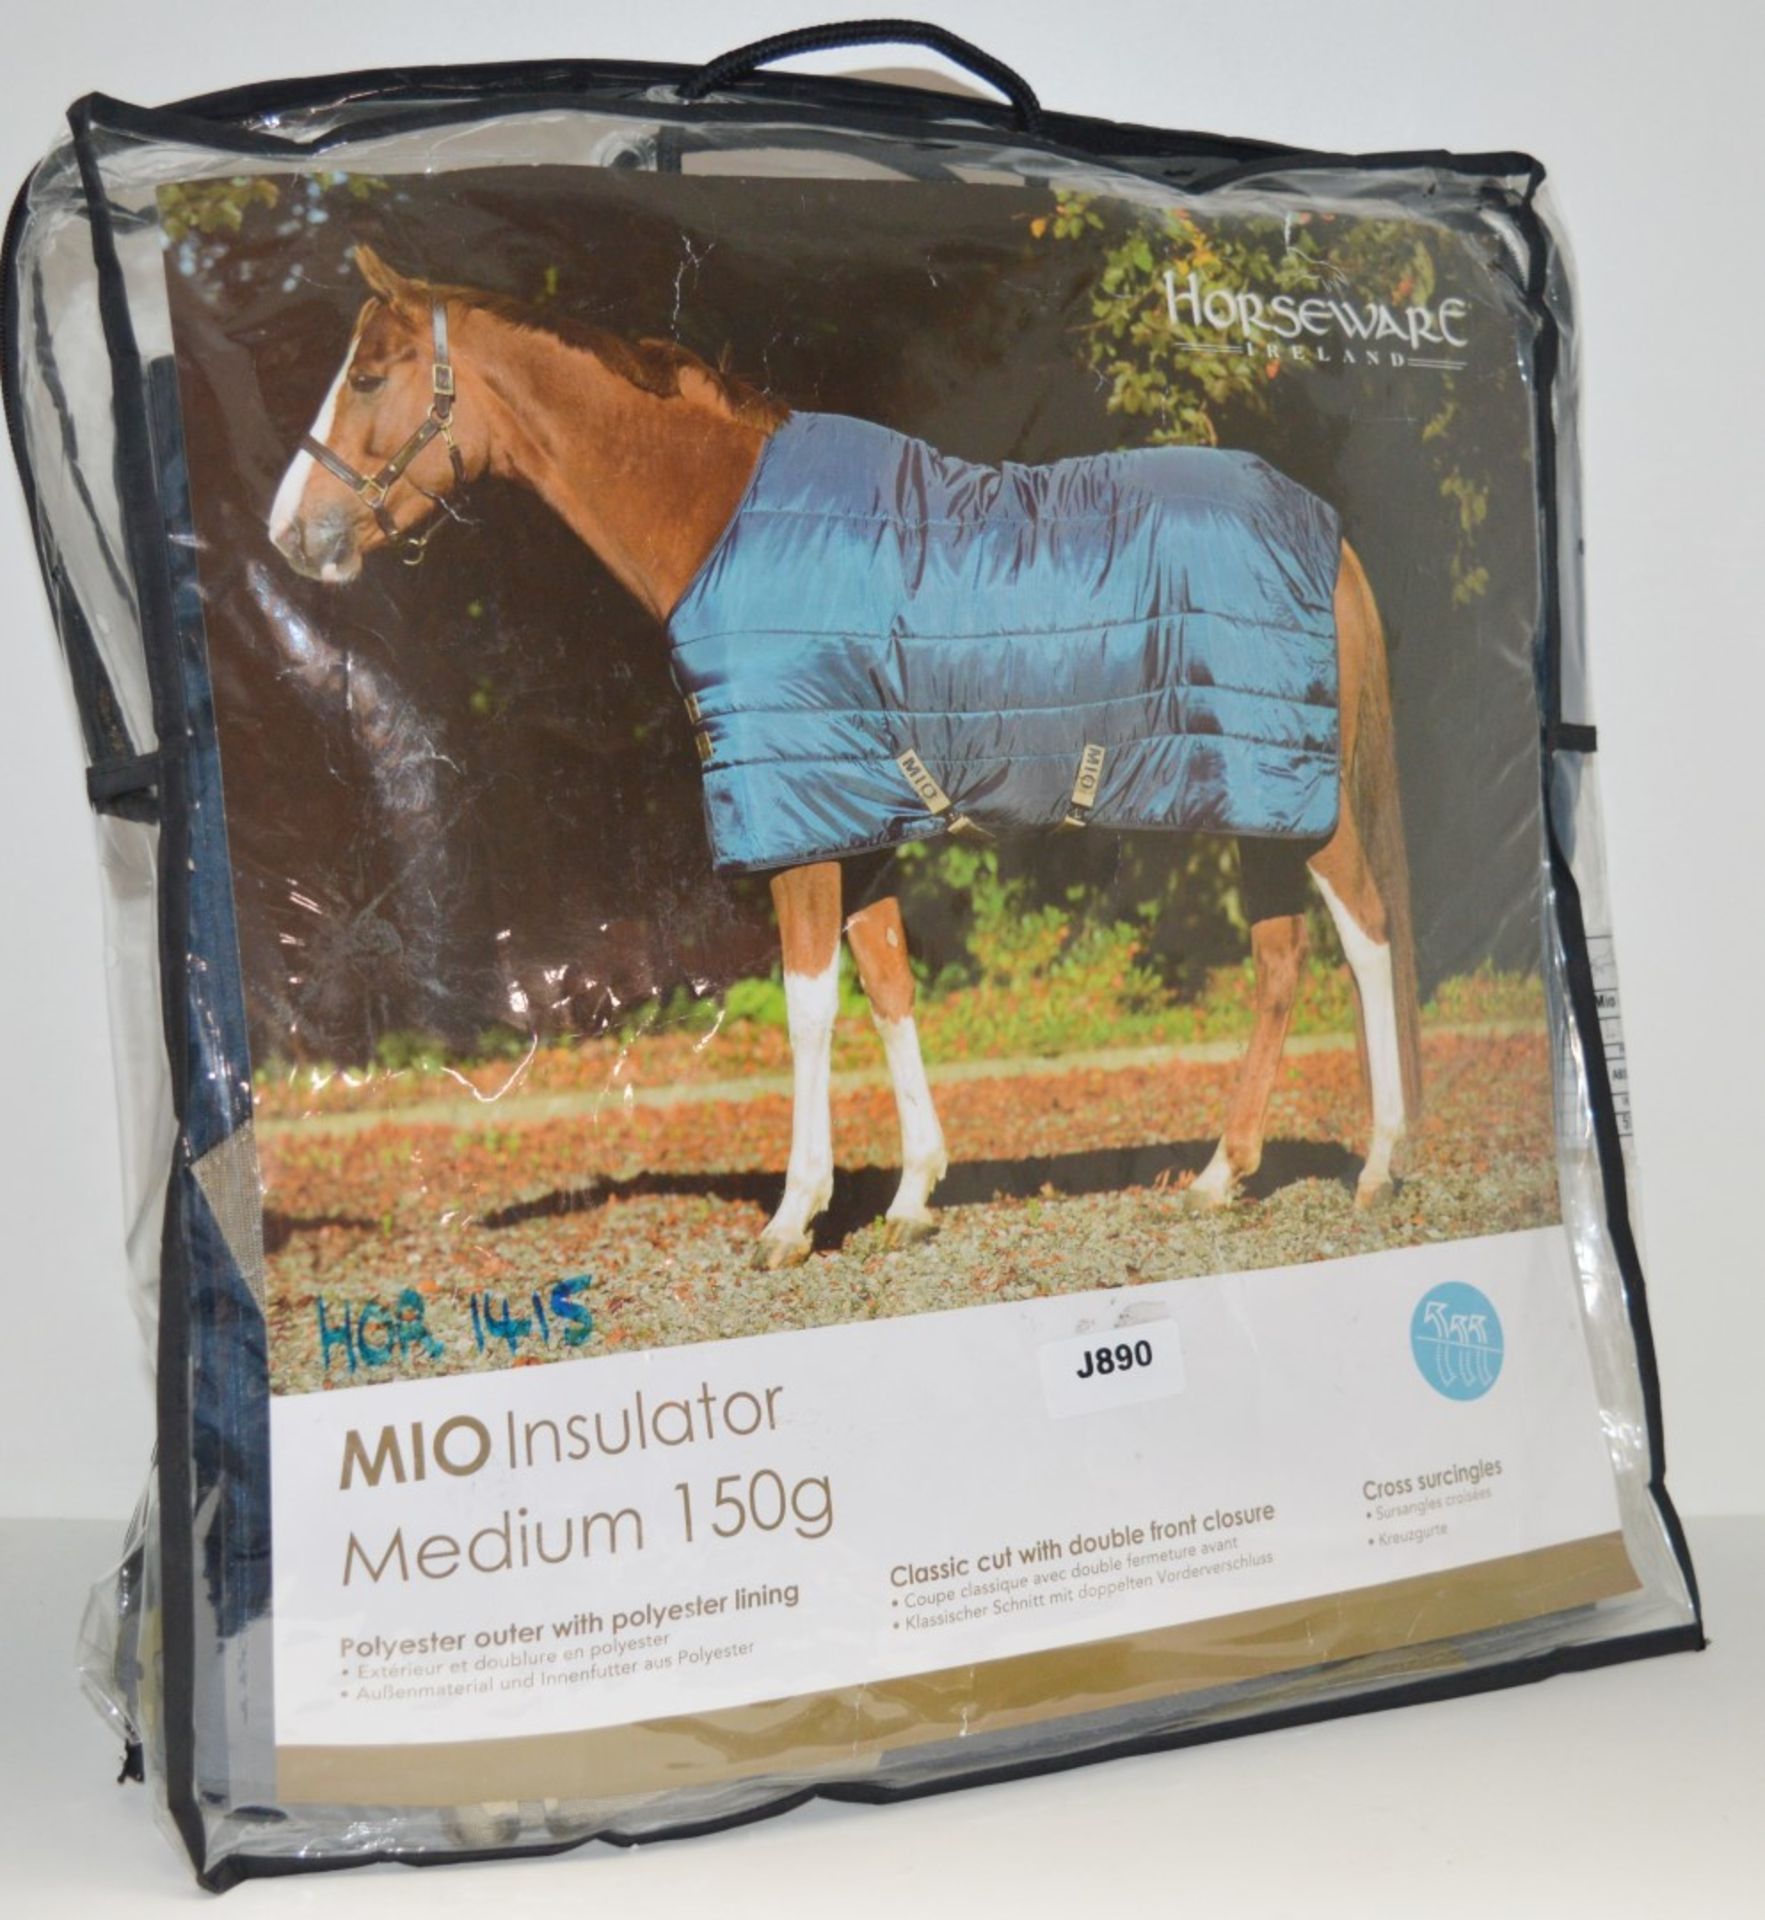 1 x Horseware Mio Insulator - Medium 150g in Navy - Size UK 51 - Product Code ABSB32-BMTB-51 - New - Image 2 of 5